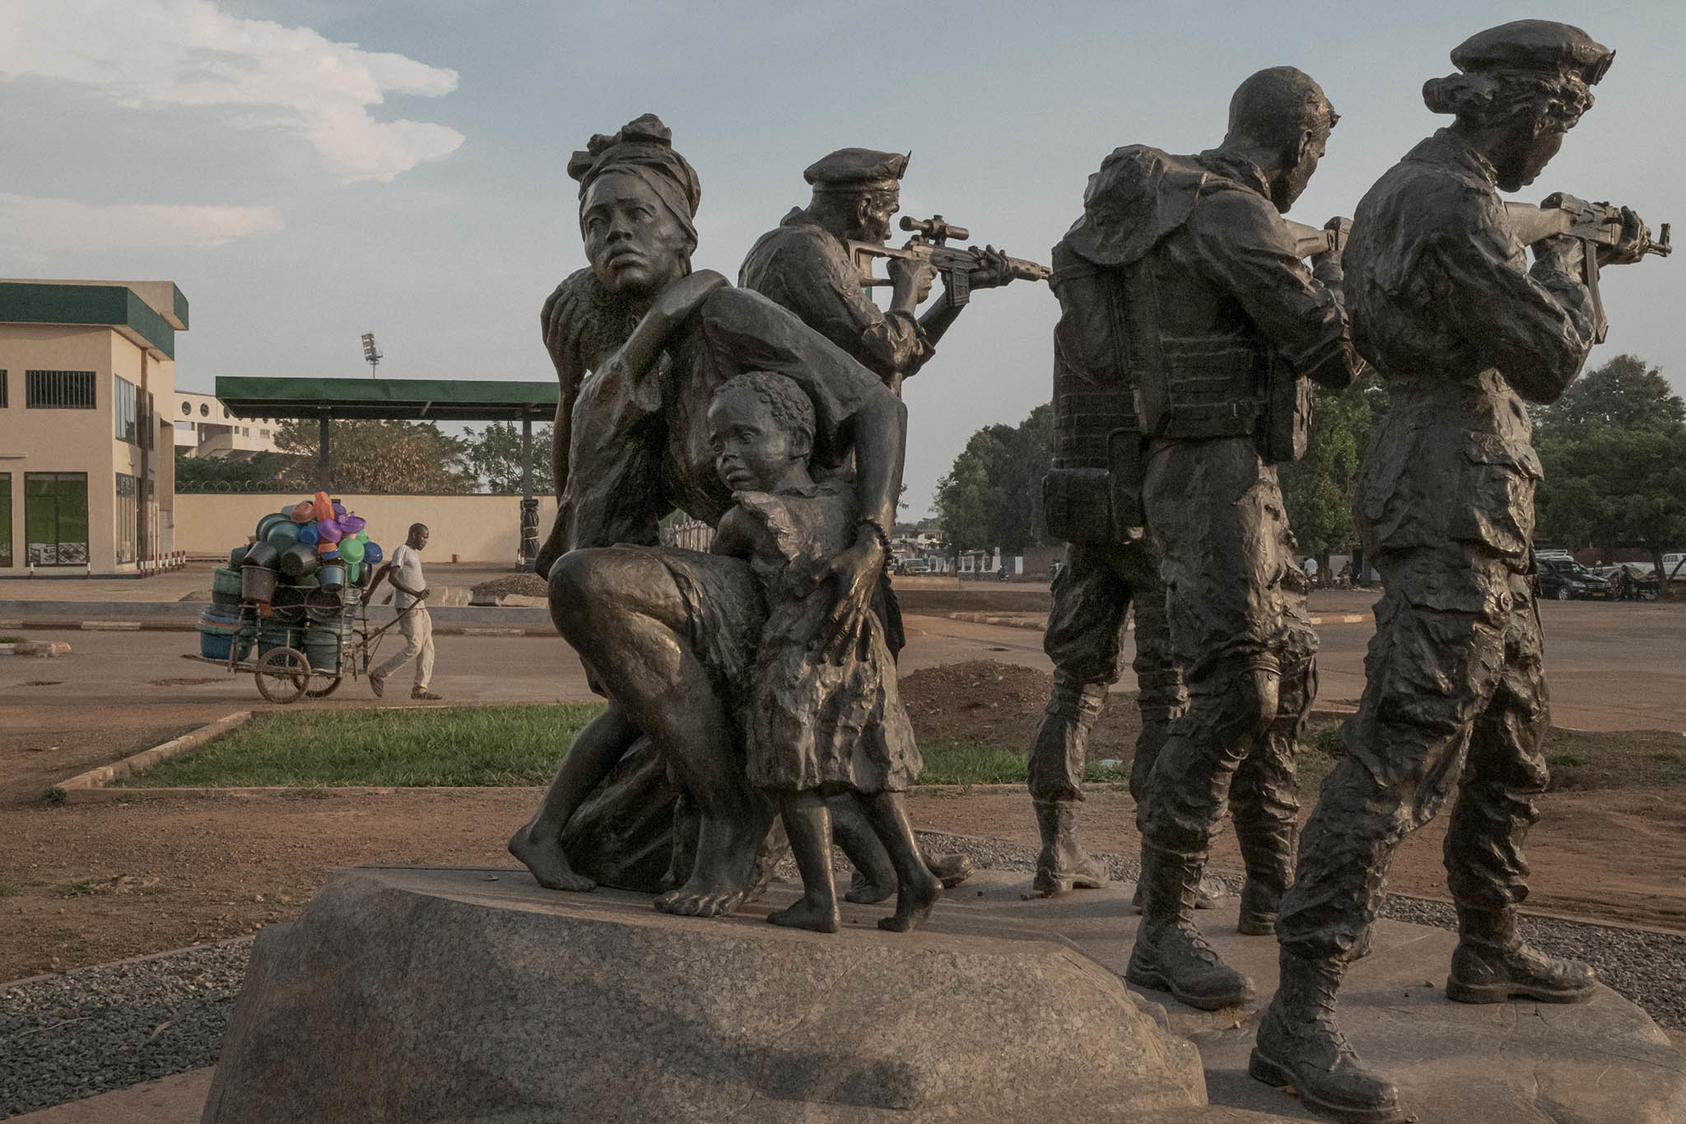 A statue in Bangui, CAR, depicts Wagner Group soldiers protecting a woman and children. Billboards, films and social media campaigns also promote Wagner’s operations to publics in several countries of the Sahel. (Mauricio Lima/The New York Times)